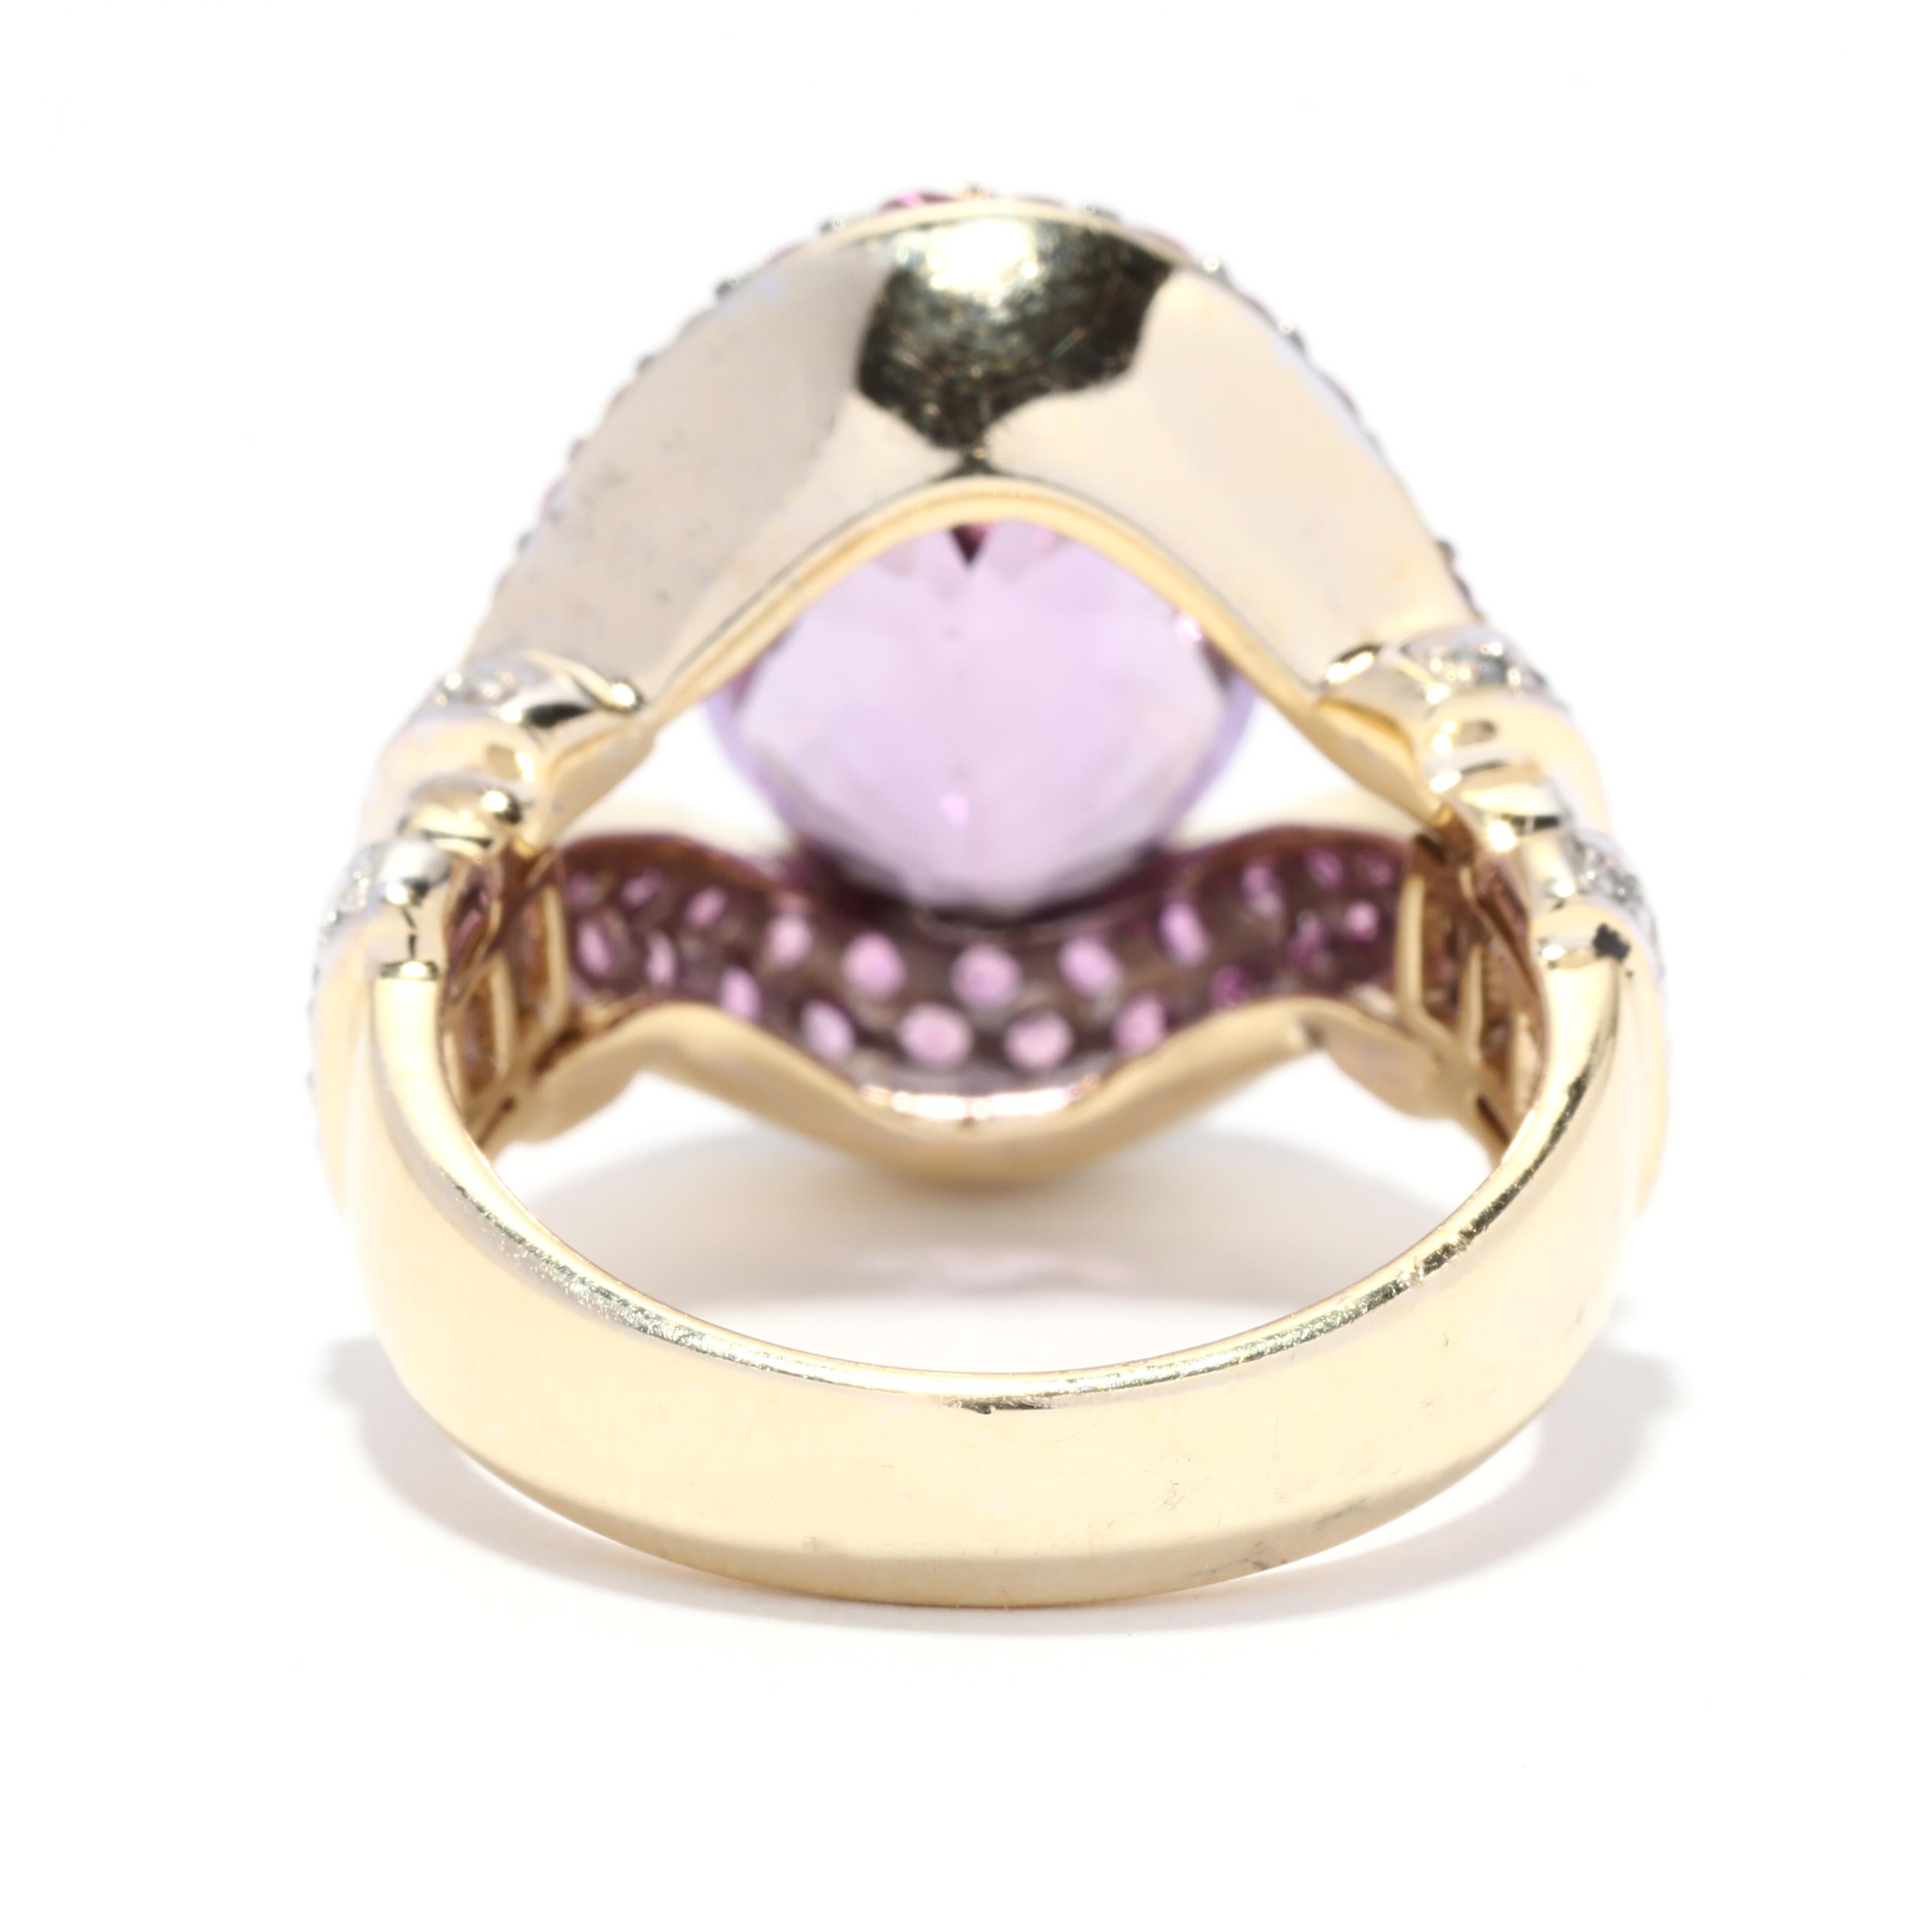 Round Cut Amethyst Pink Sapphire Diamond Cocktail Ring, 14KT Yellow Gold